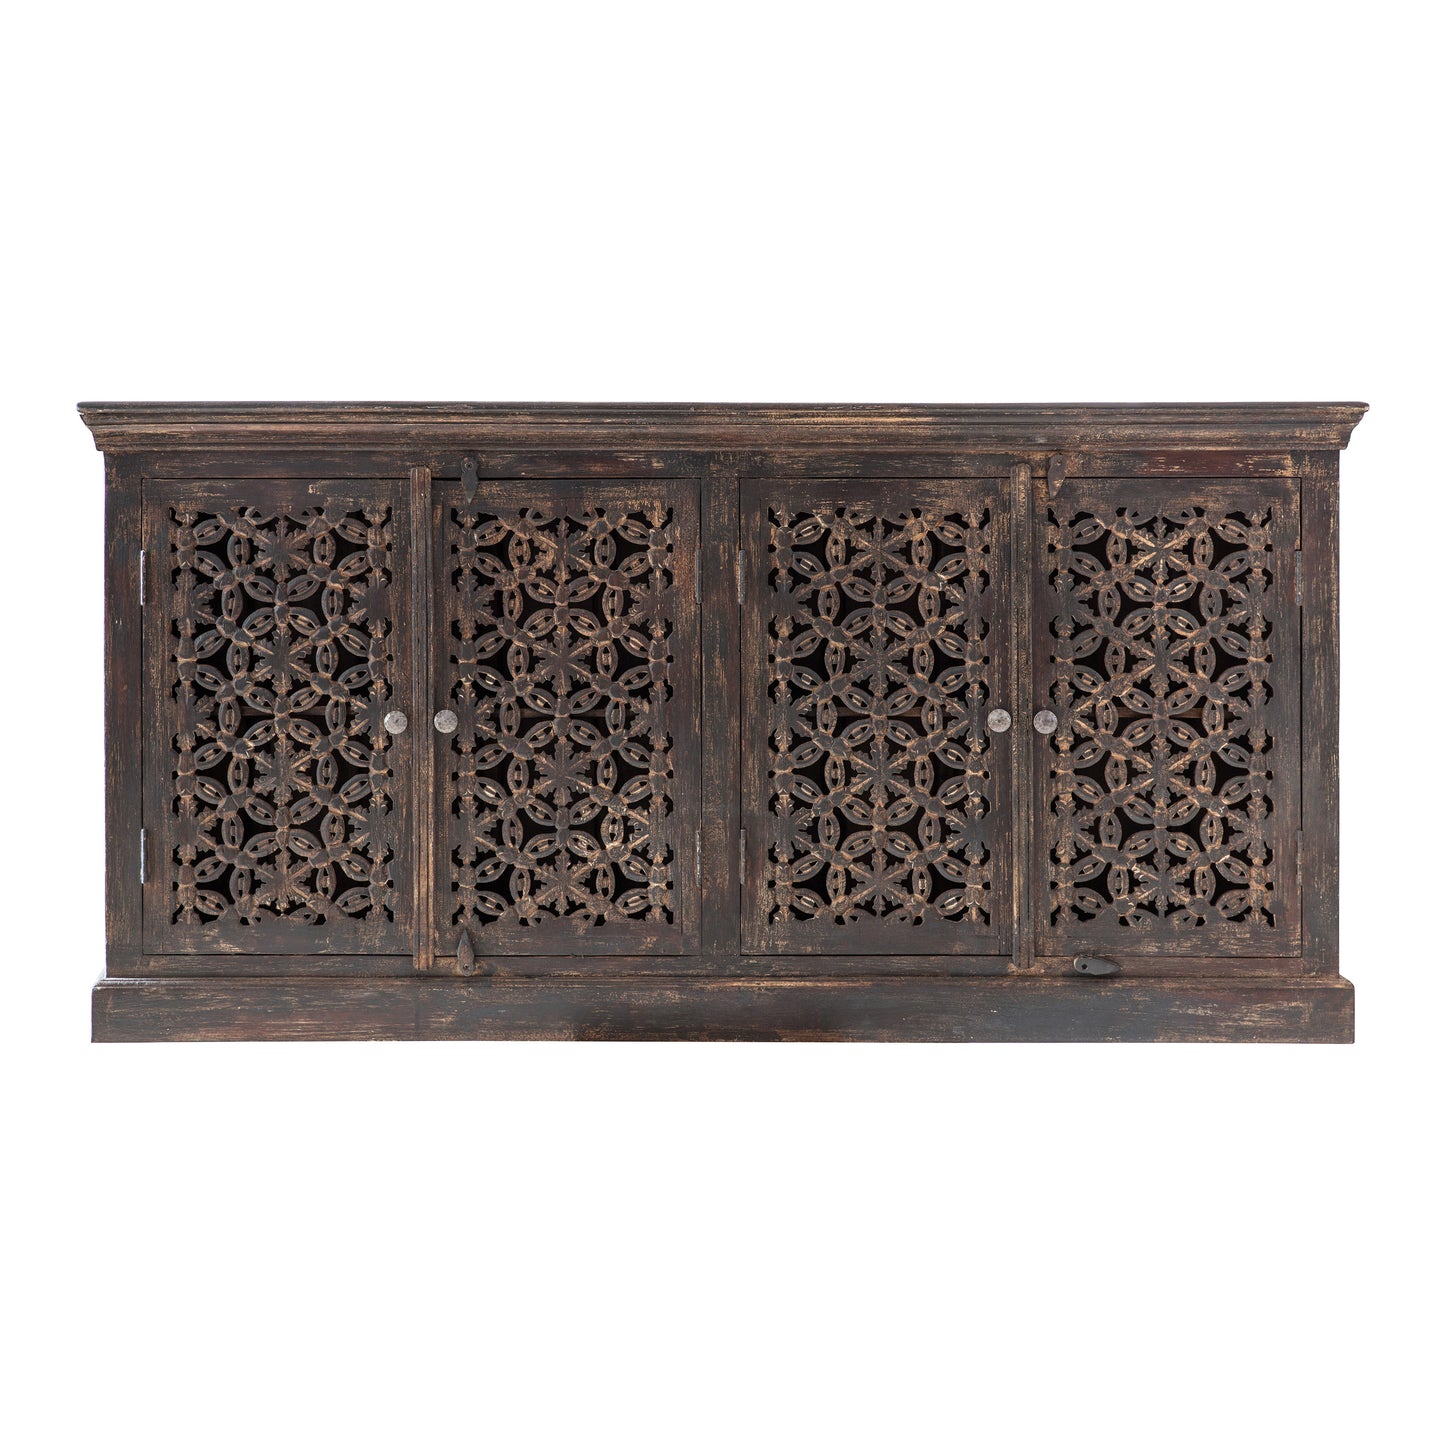 Load image into Gallery viewer, An ornate Chillington 4 Door Sideboard 1800x410x900mm with intricate carvings, perfect for home furniture and interior decor, from Kikiathome.co.uk.
